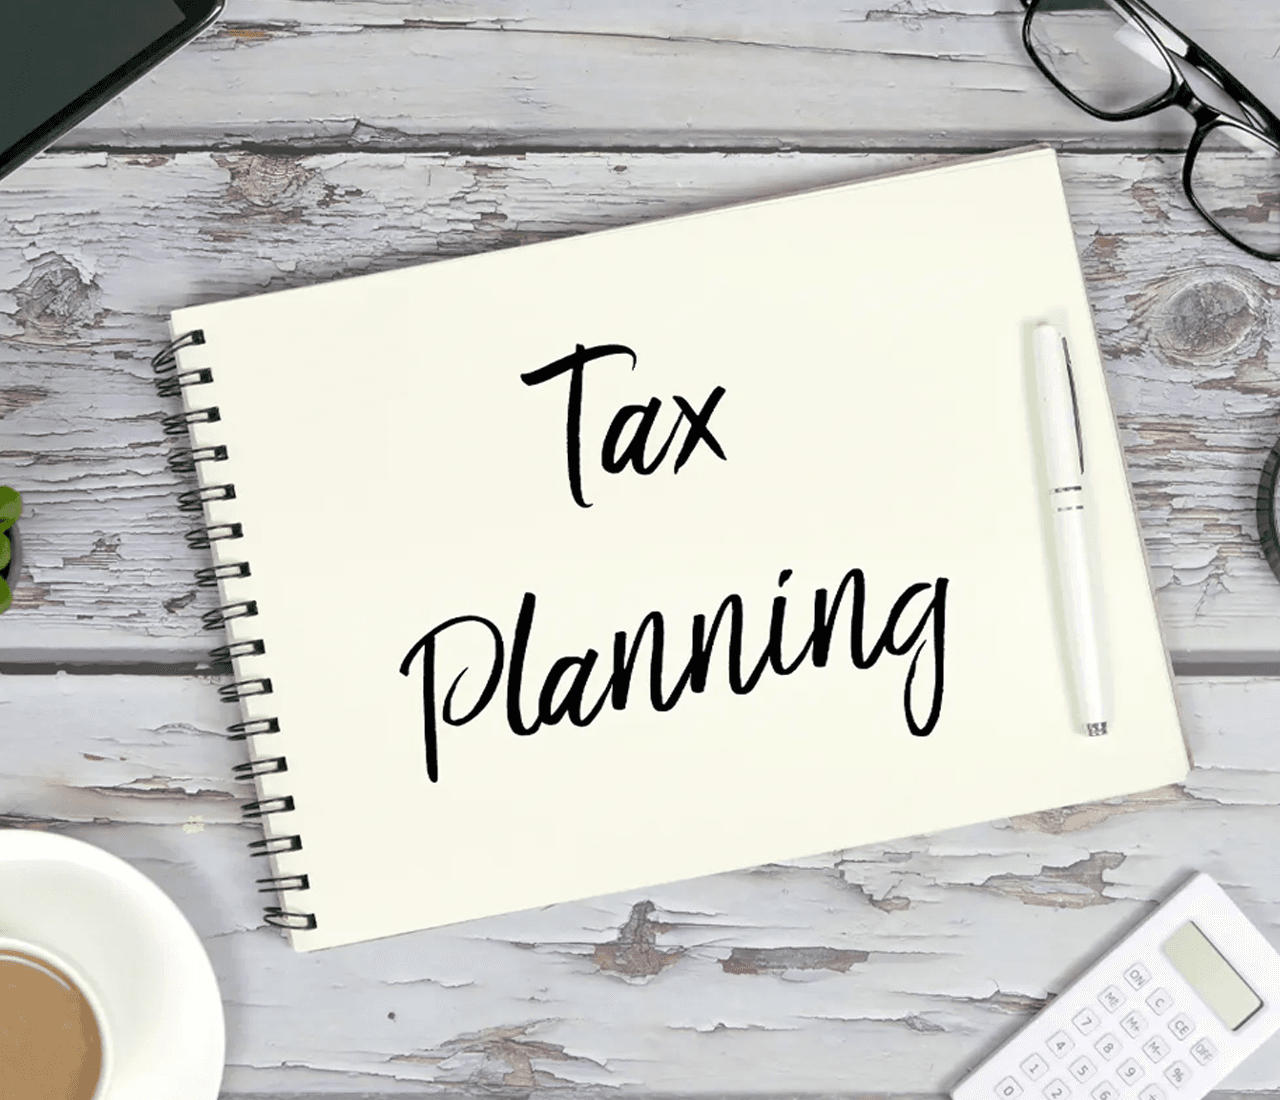 Tax year planning: helping you every step of the way